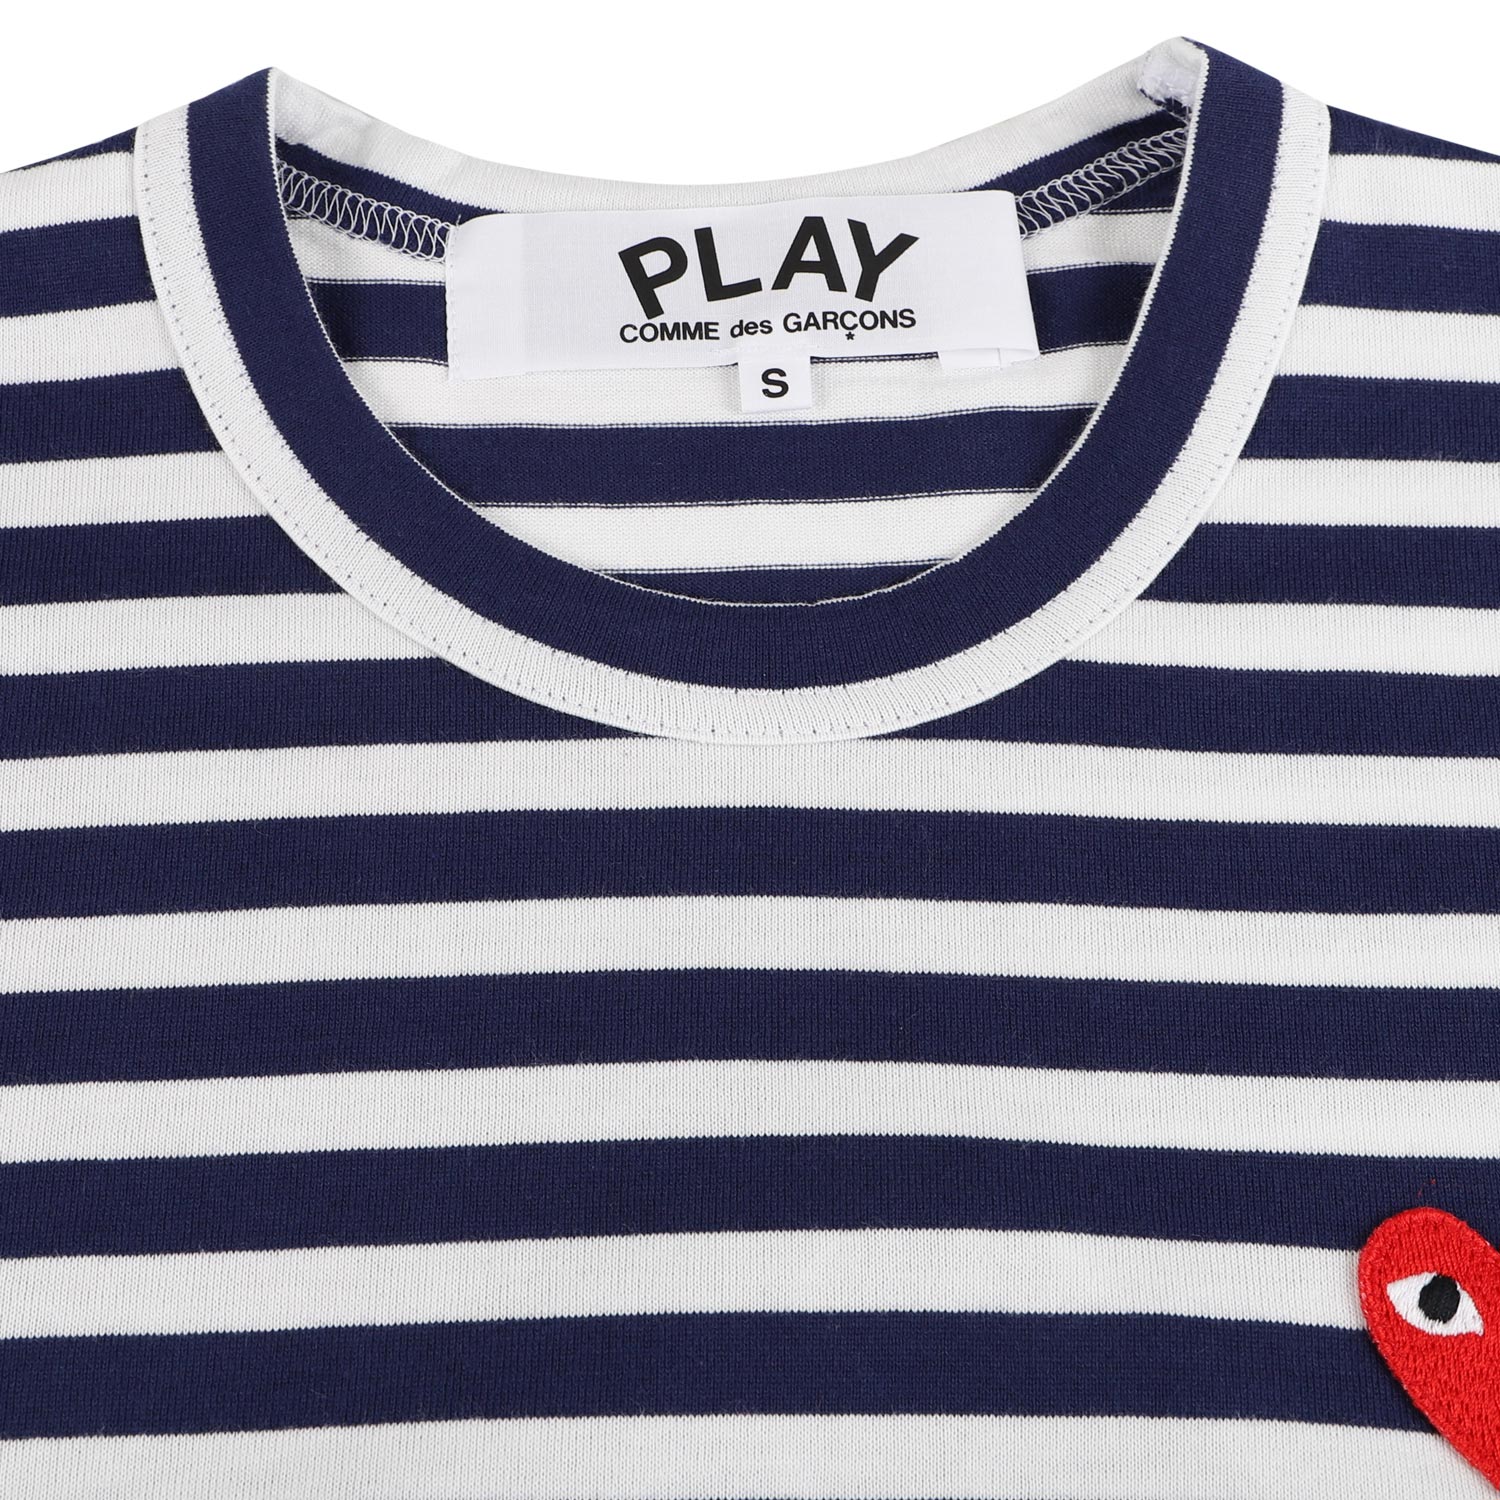 PLAY COMME des GARCONS RED HEART PLAY STRIPED T-SHIRT プレイ コムデギャルソン Tシャツ 長袖 カットソー メンズ ロンT ボーダー レッドハート ロゴ ネイビー T010